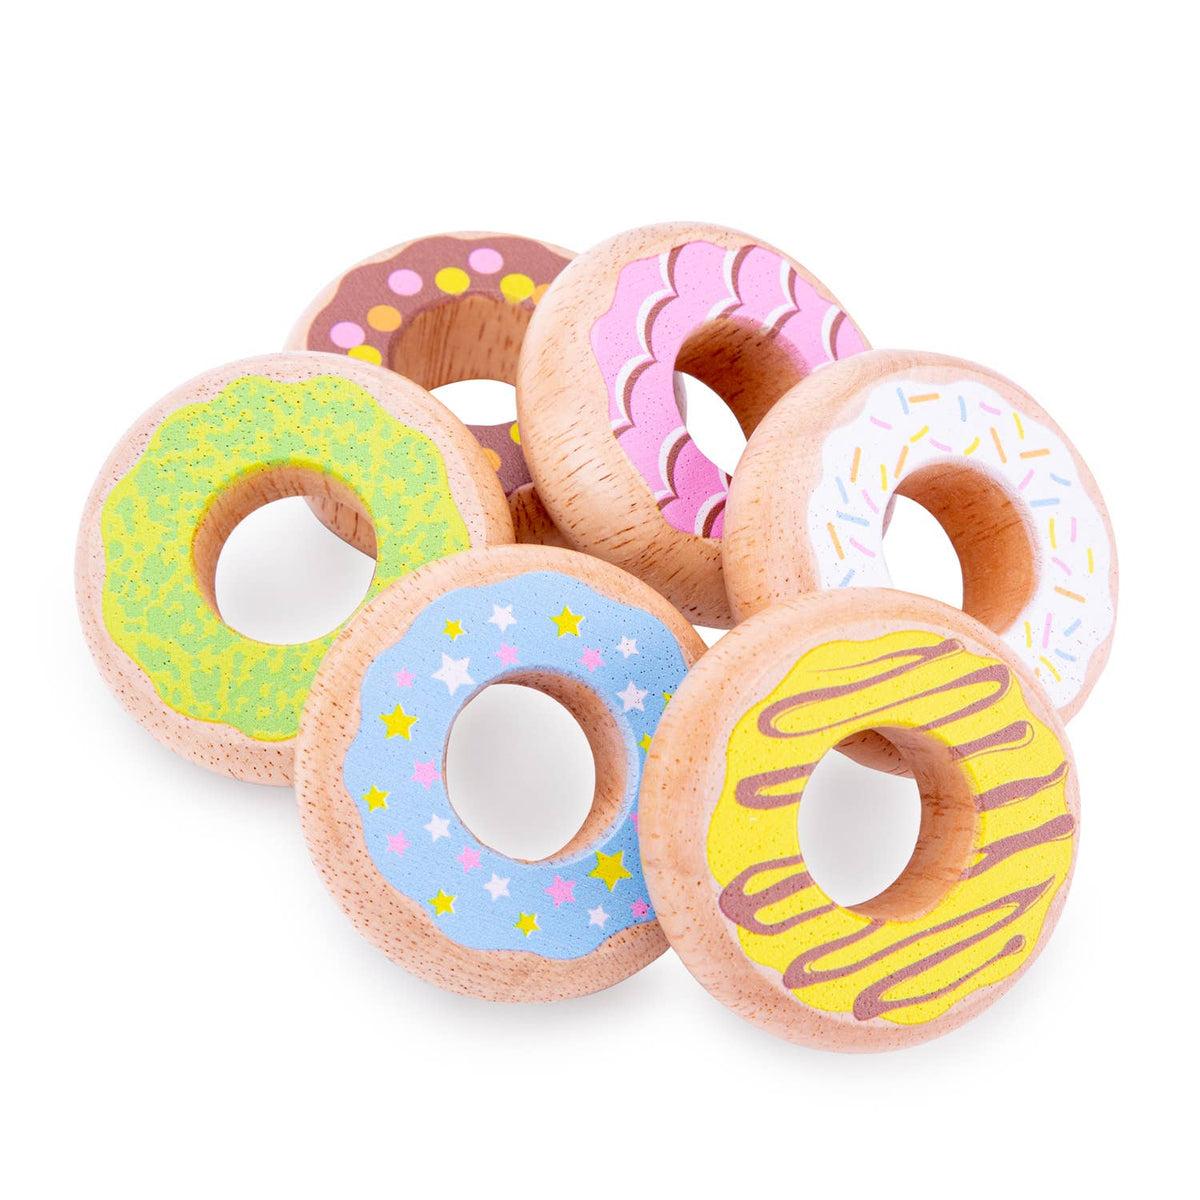 Donuts - 6 pieces